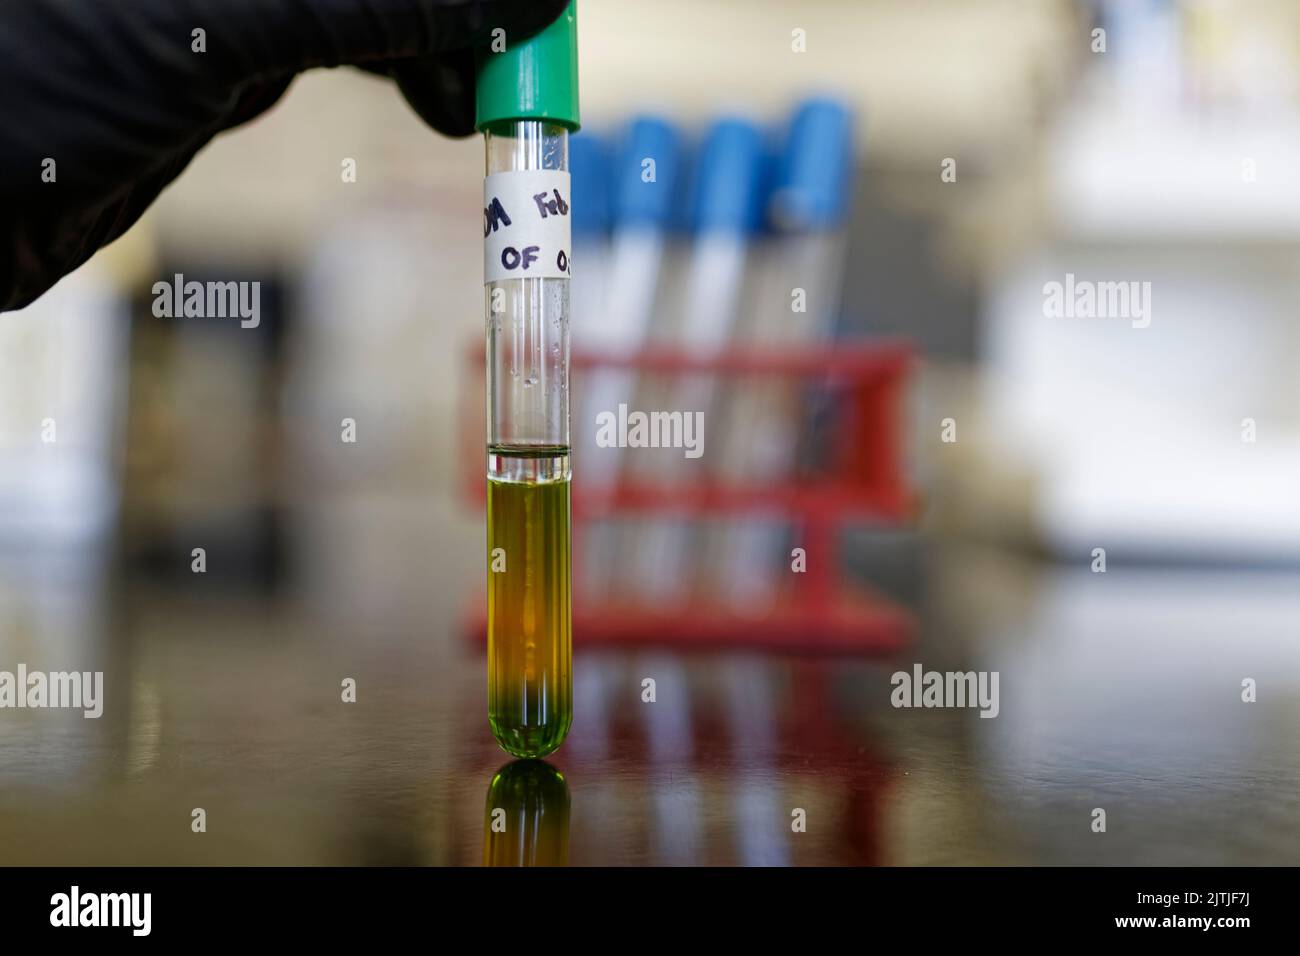 Fermentation-Oxidization test for bacterial identification showing color change. Stock Photo